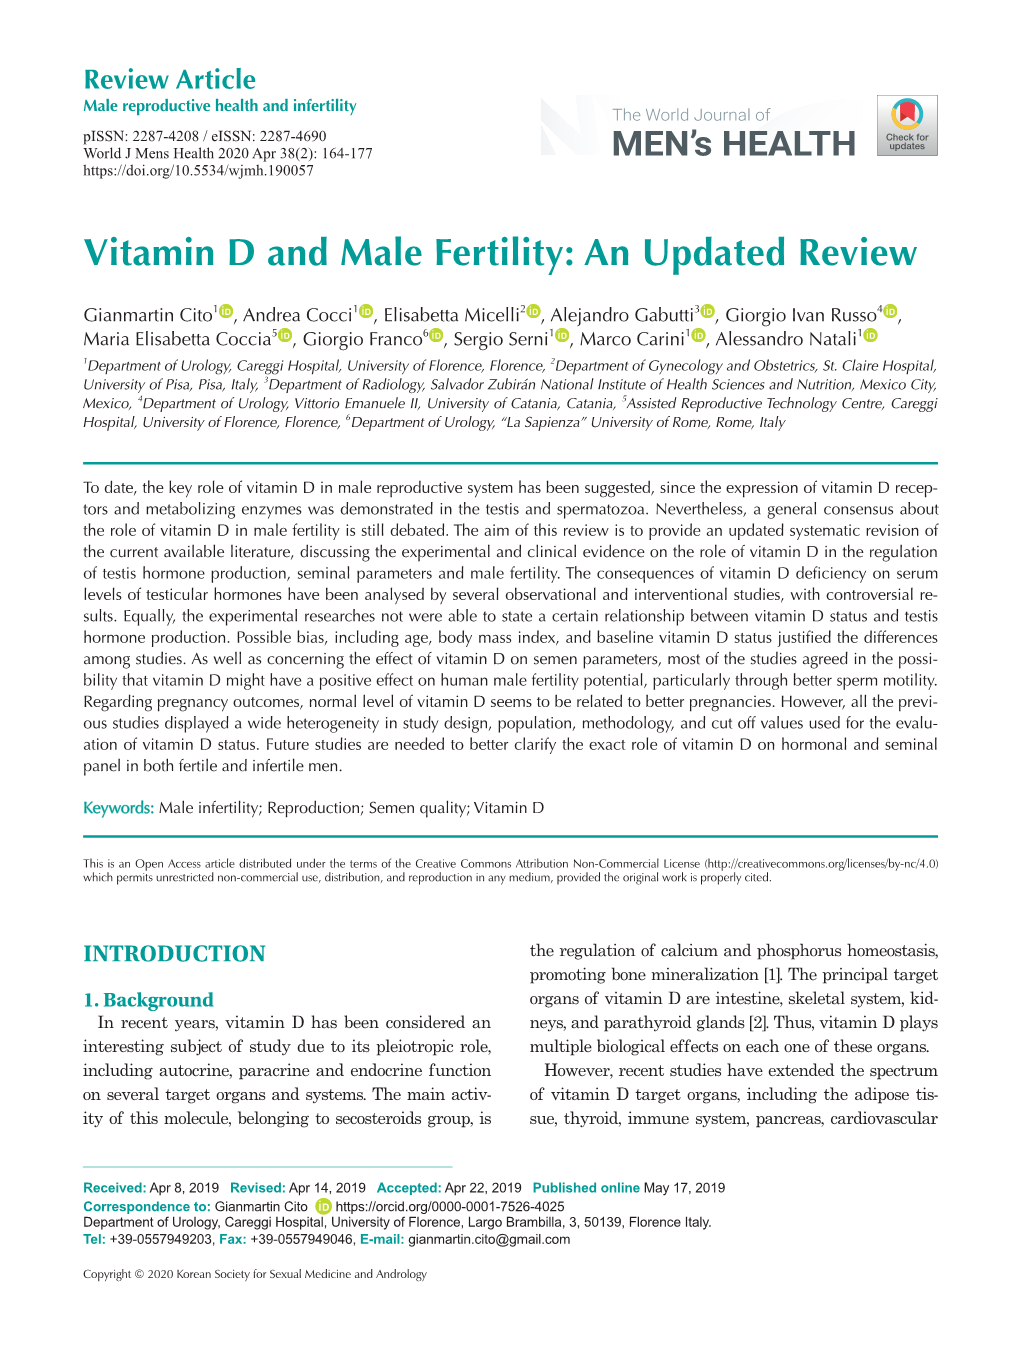 Vitamin D and Male Fertility: an Updated Review